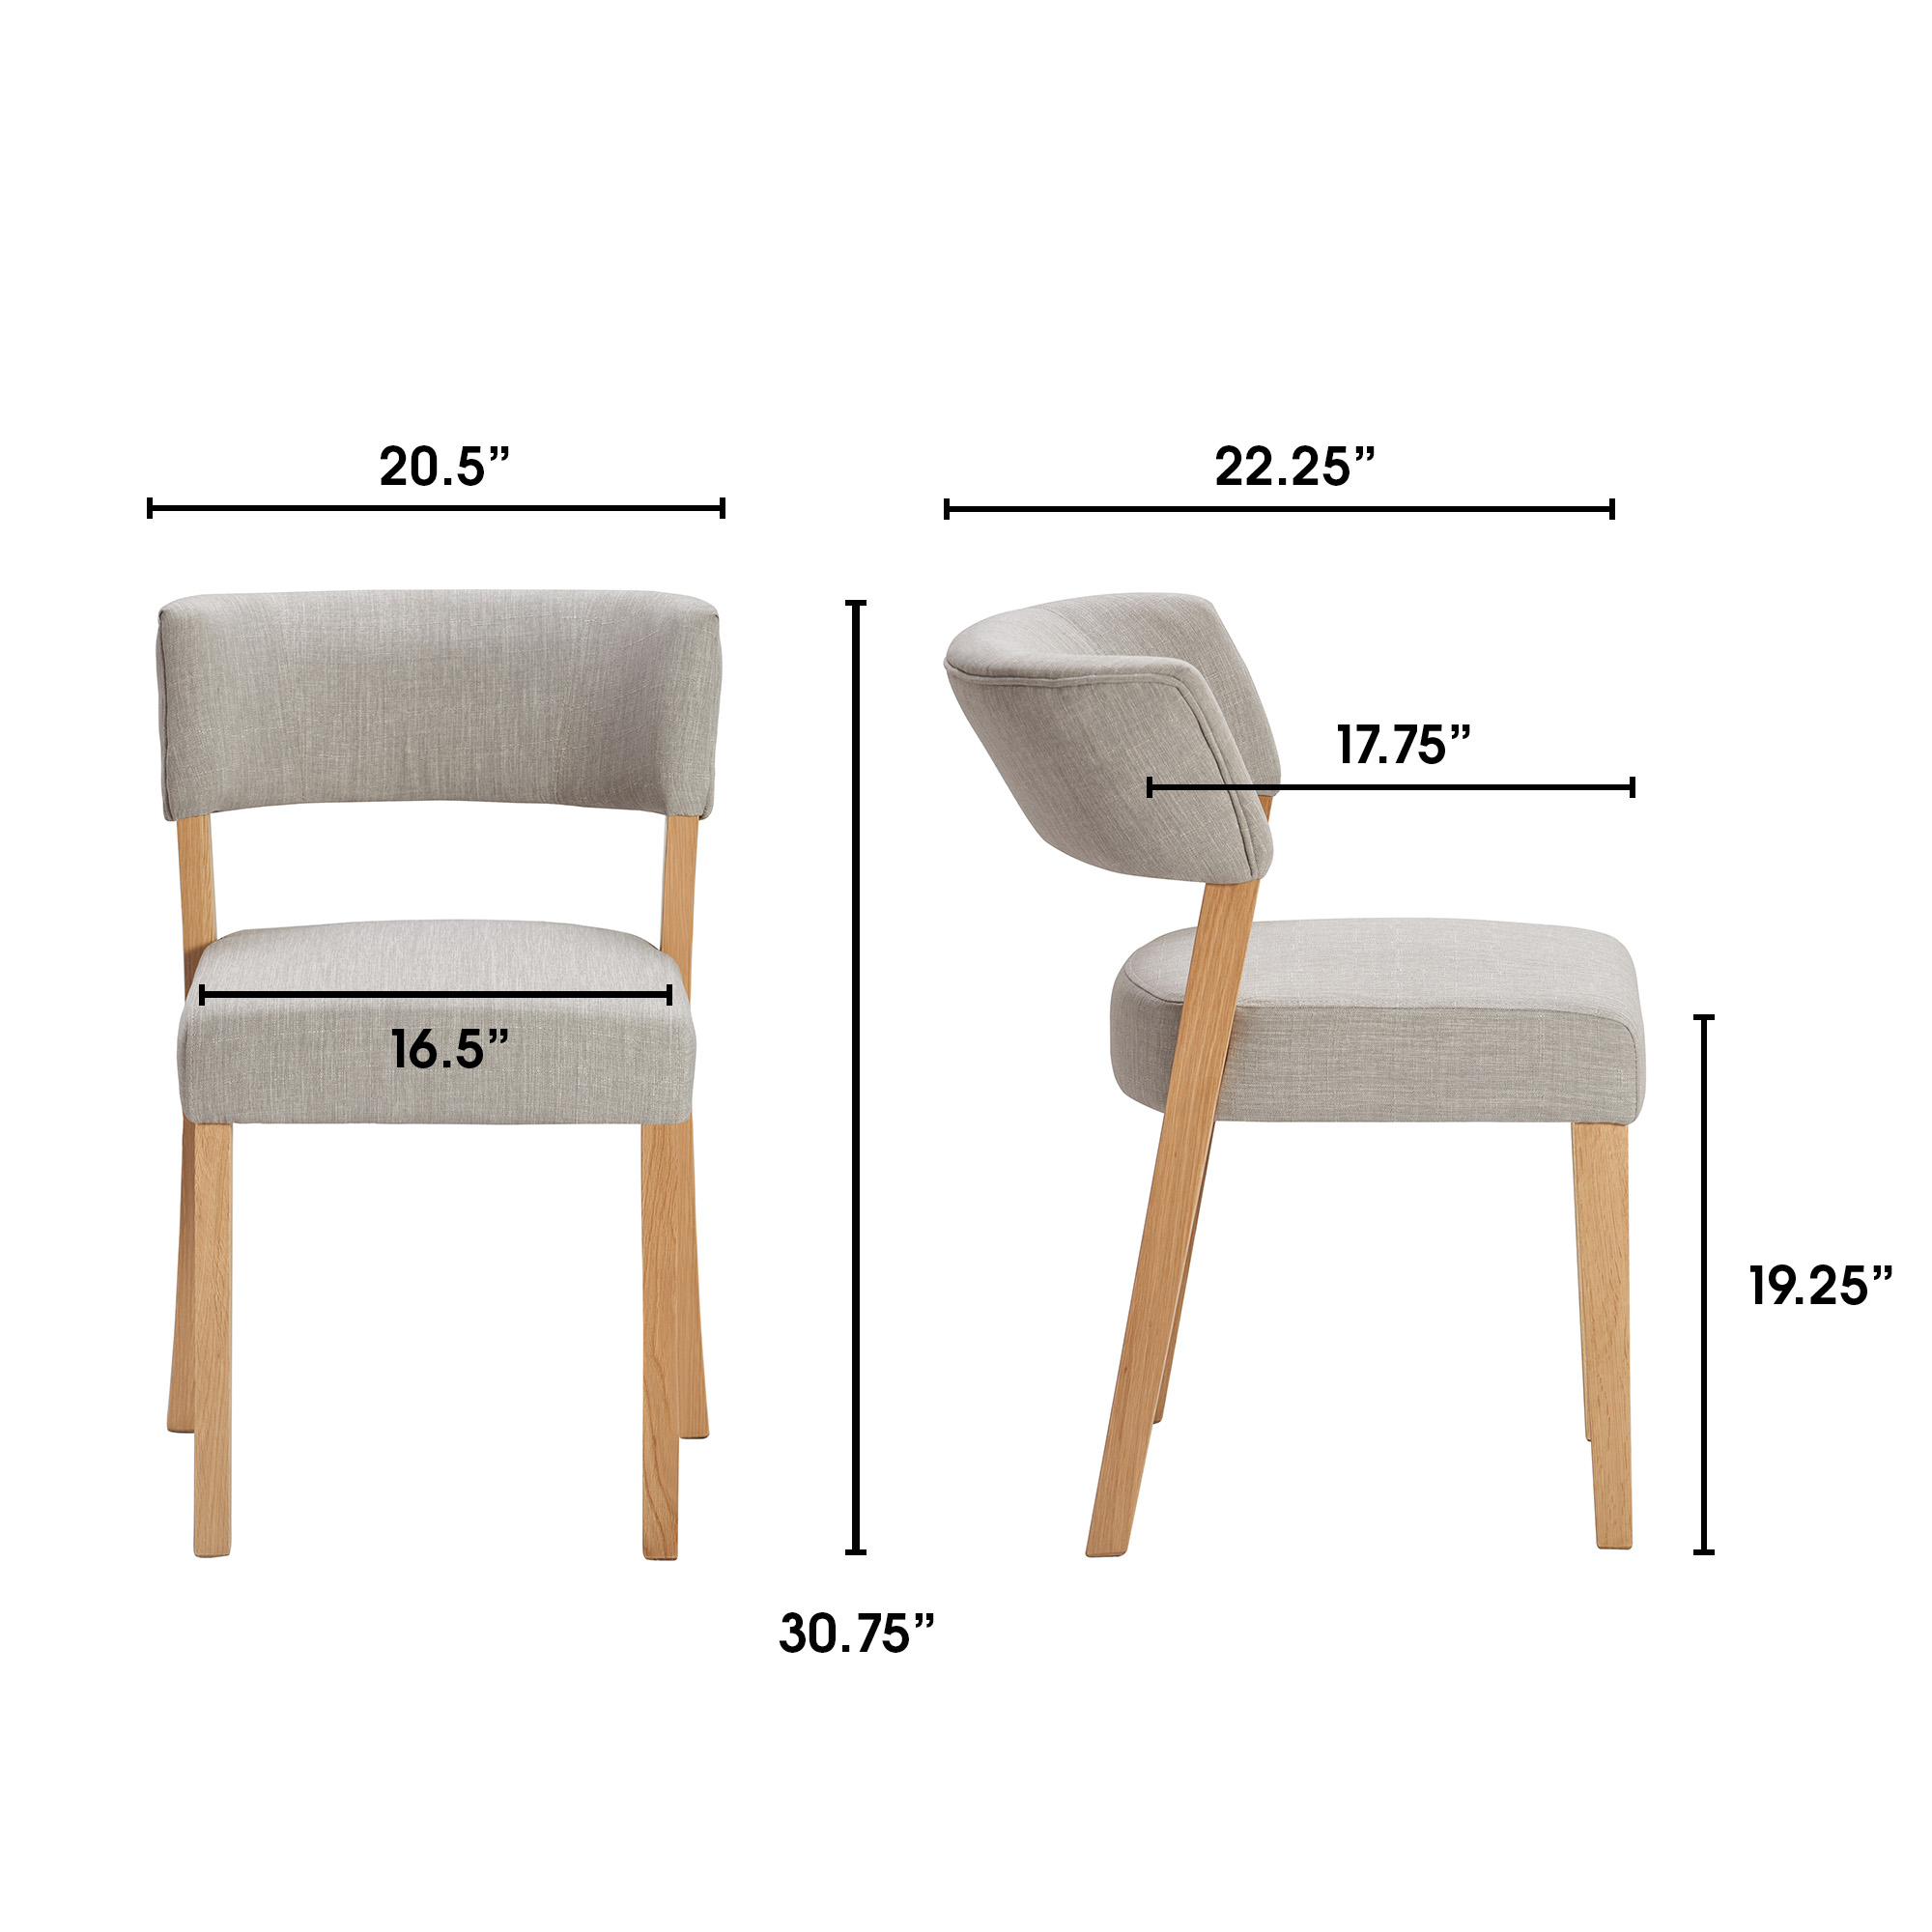 Waltham dining chair with dimensions